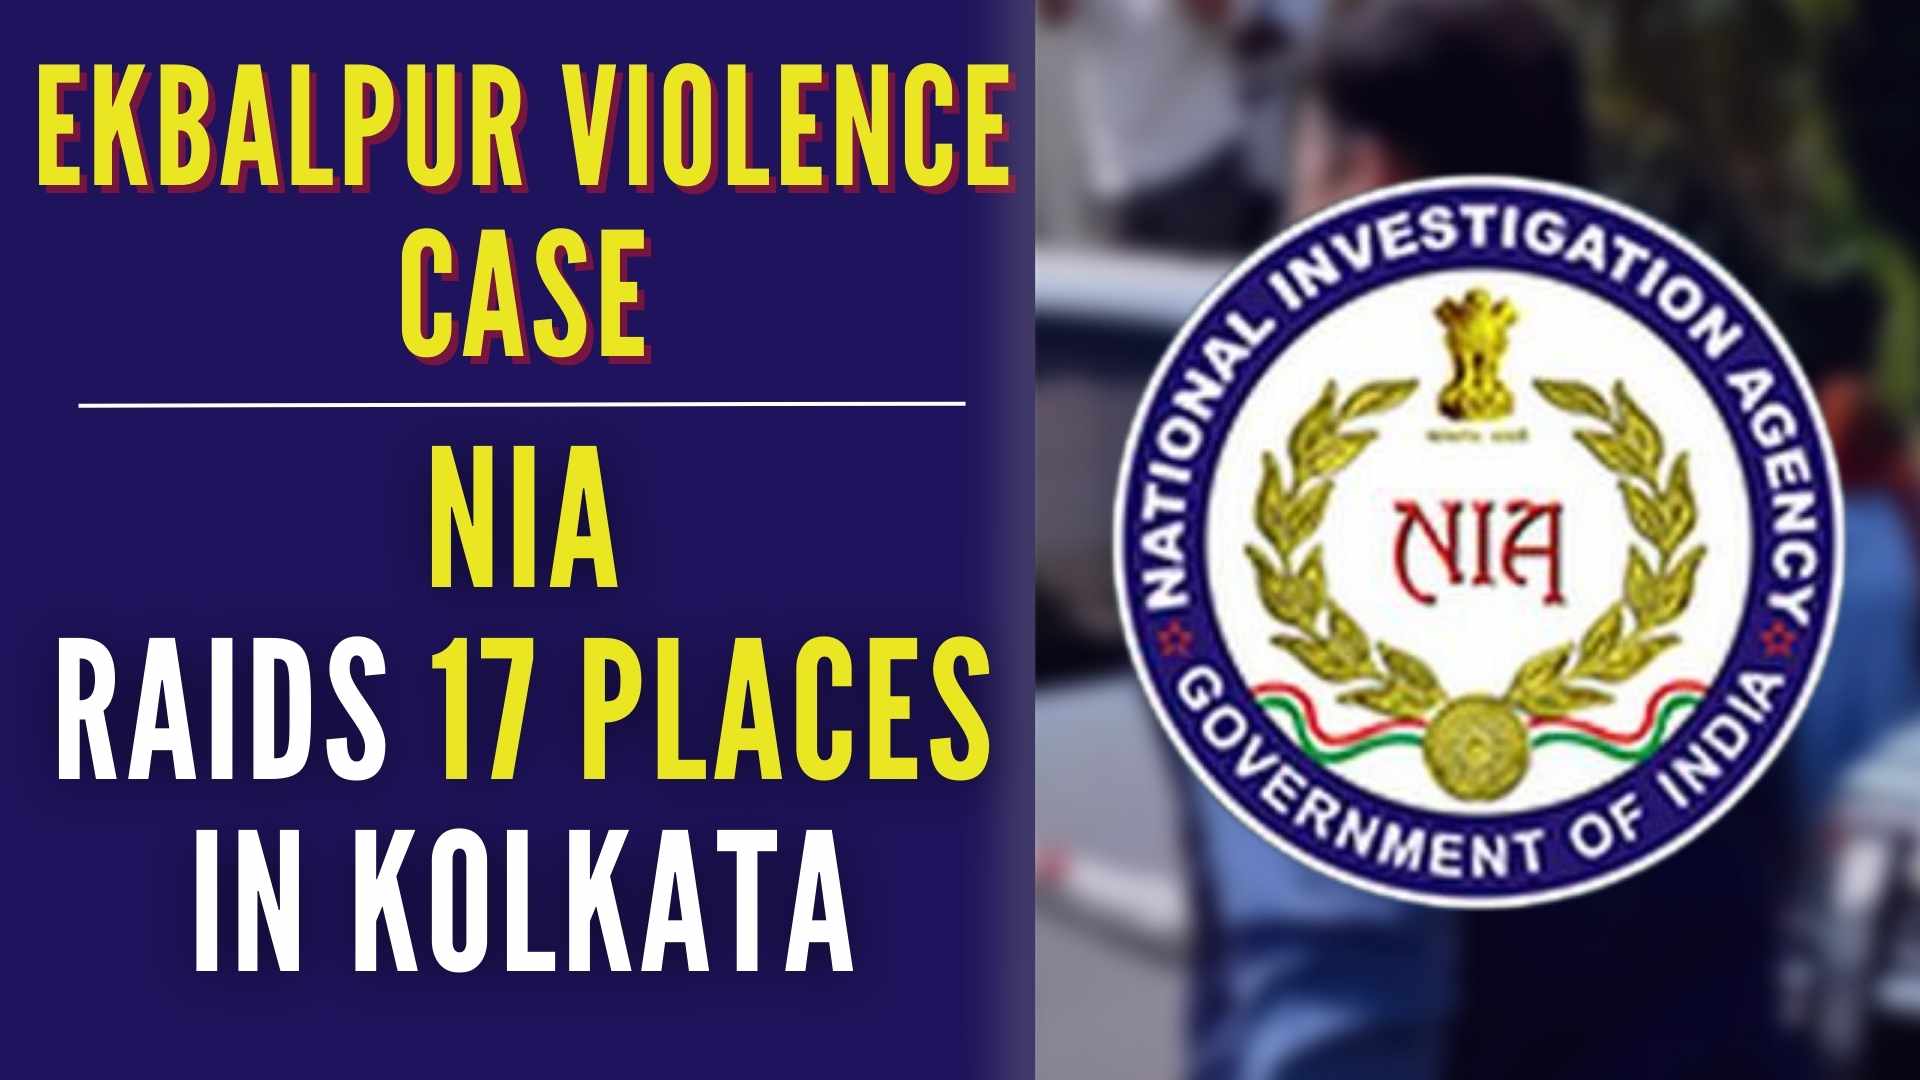 On October 19, the NIA took over the investigation into the matter from the special investigation team (SIT) of the Kolkata police